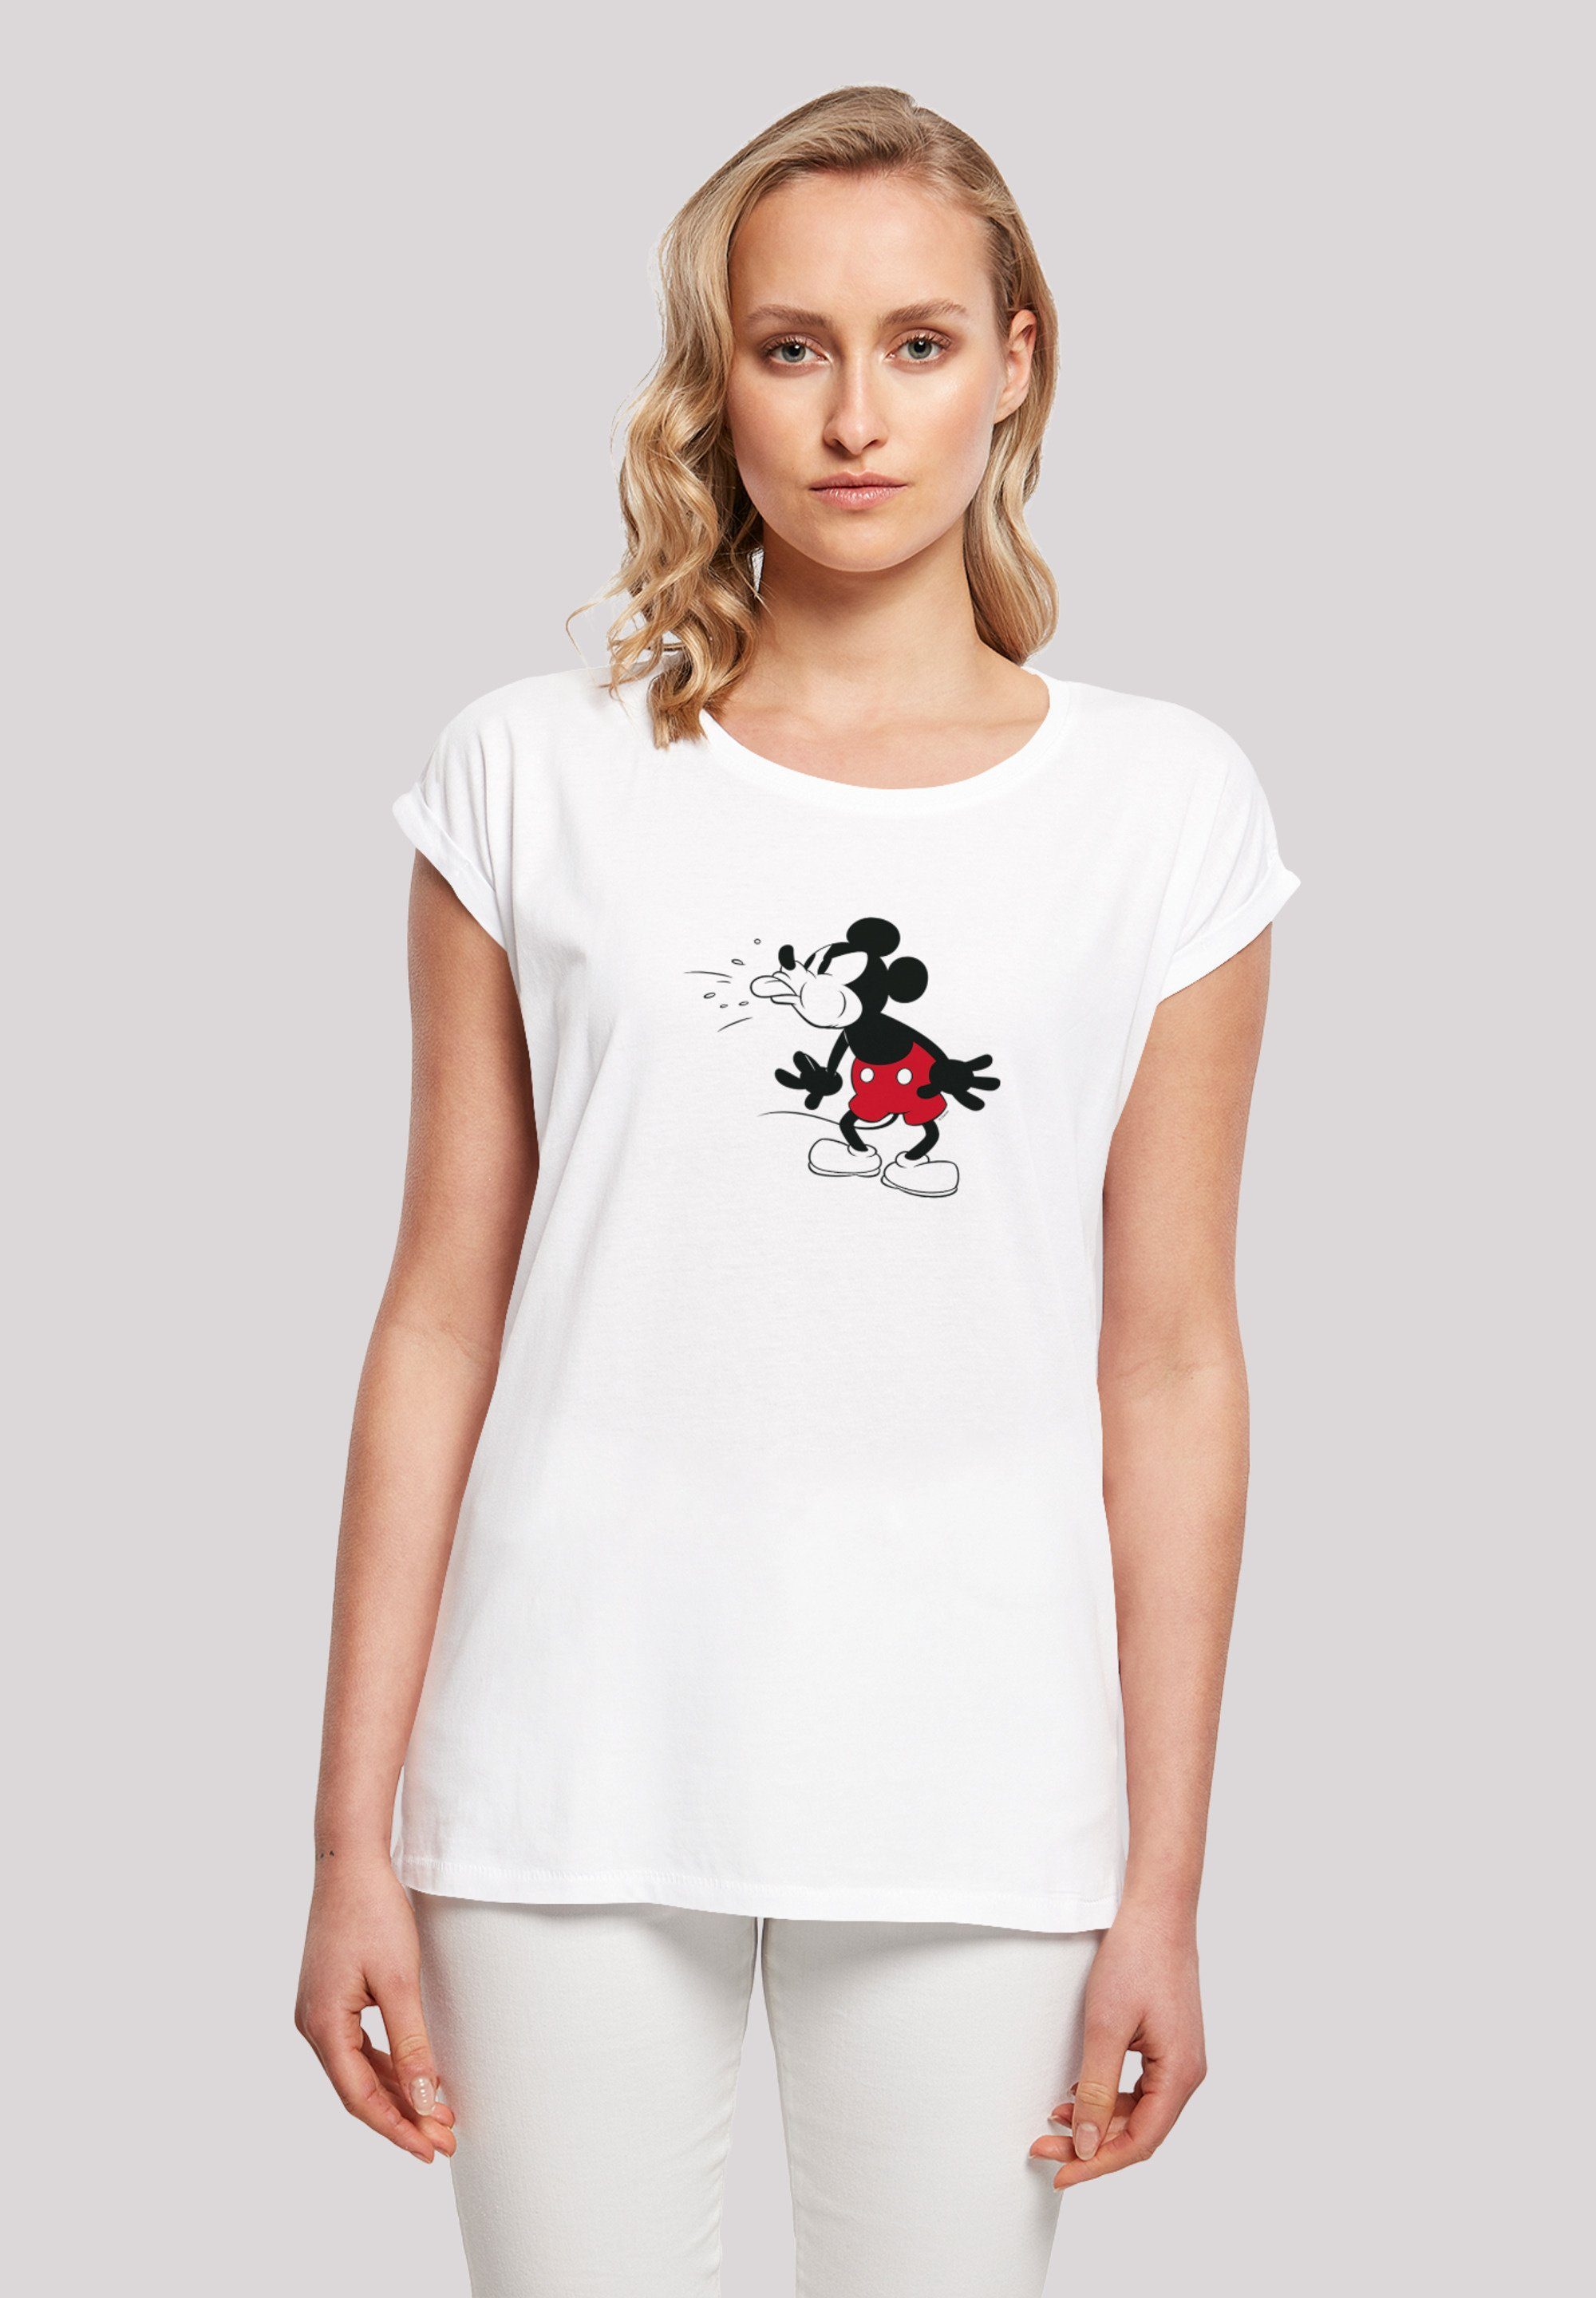 F4NT4STIC T-Shirt Mouse Mickey Classic Micky Disney Print Vintage Maus